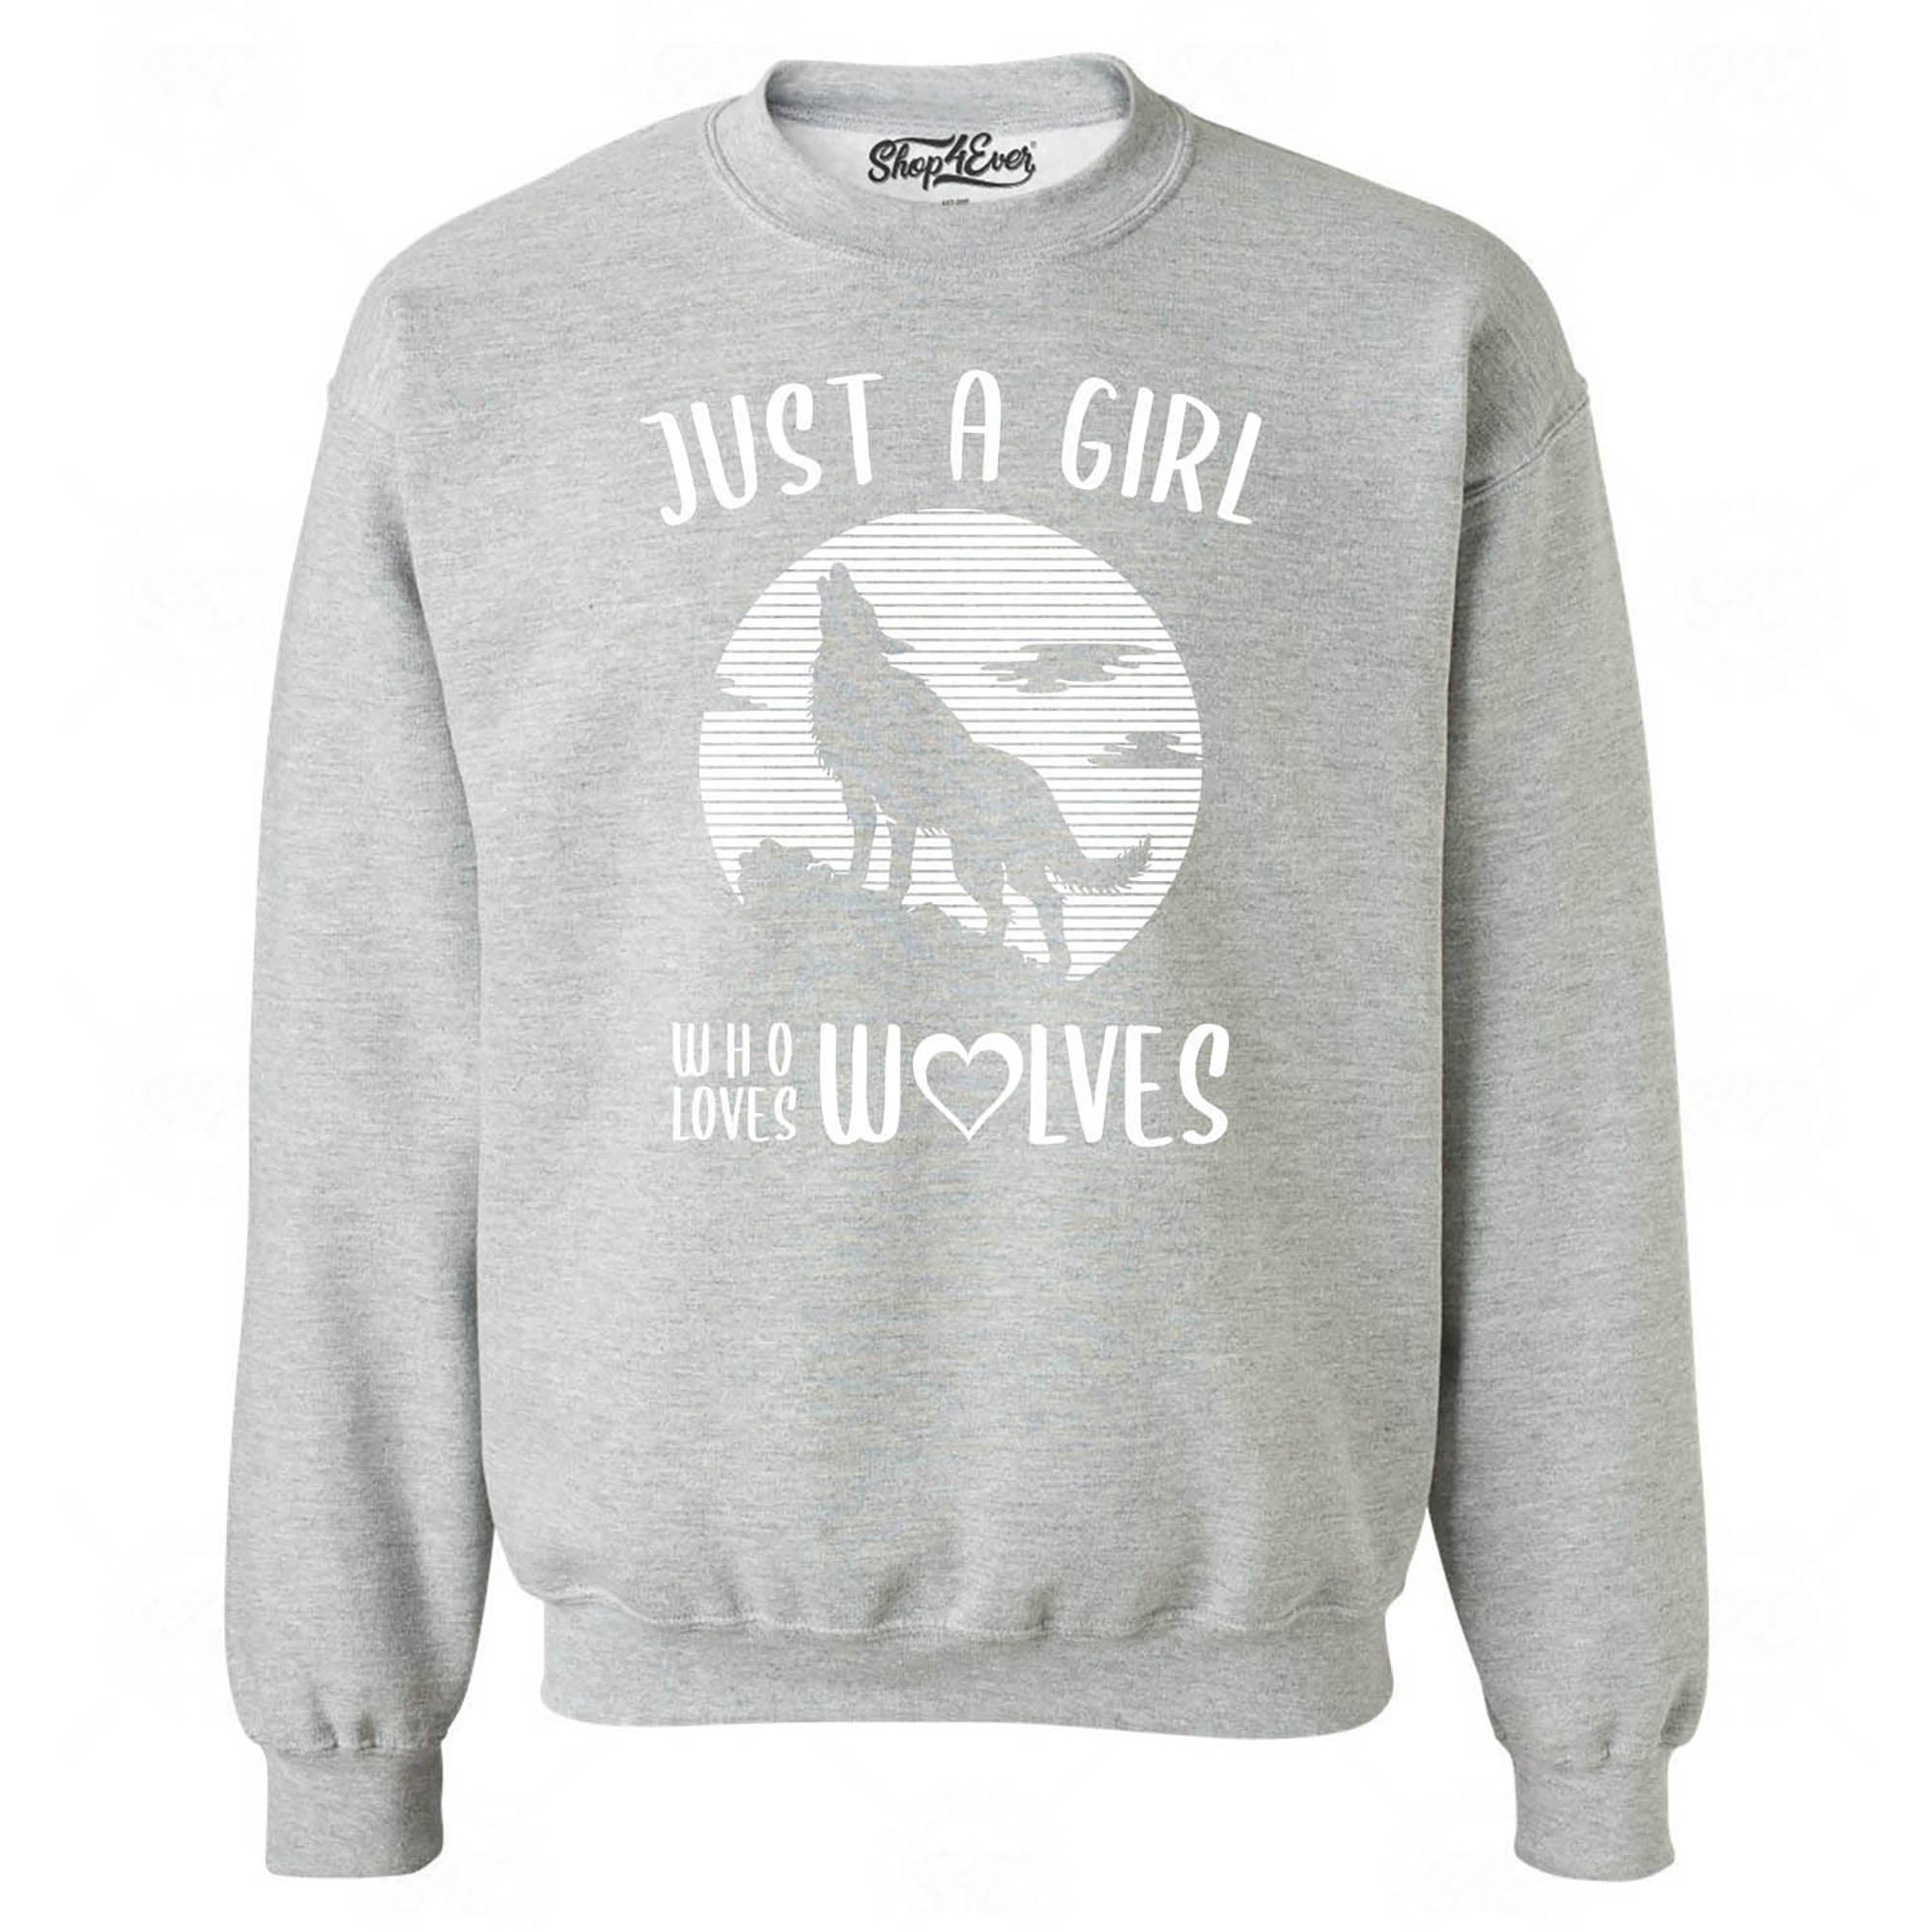 Just A Girl Who Loves Wolves Crewneck Sweatshirts